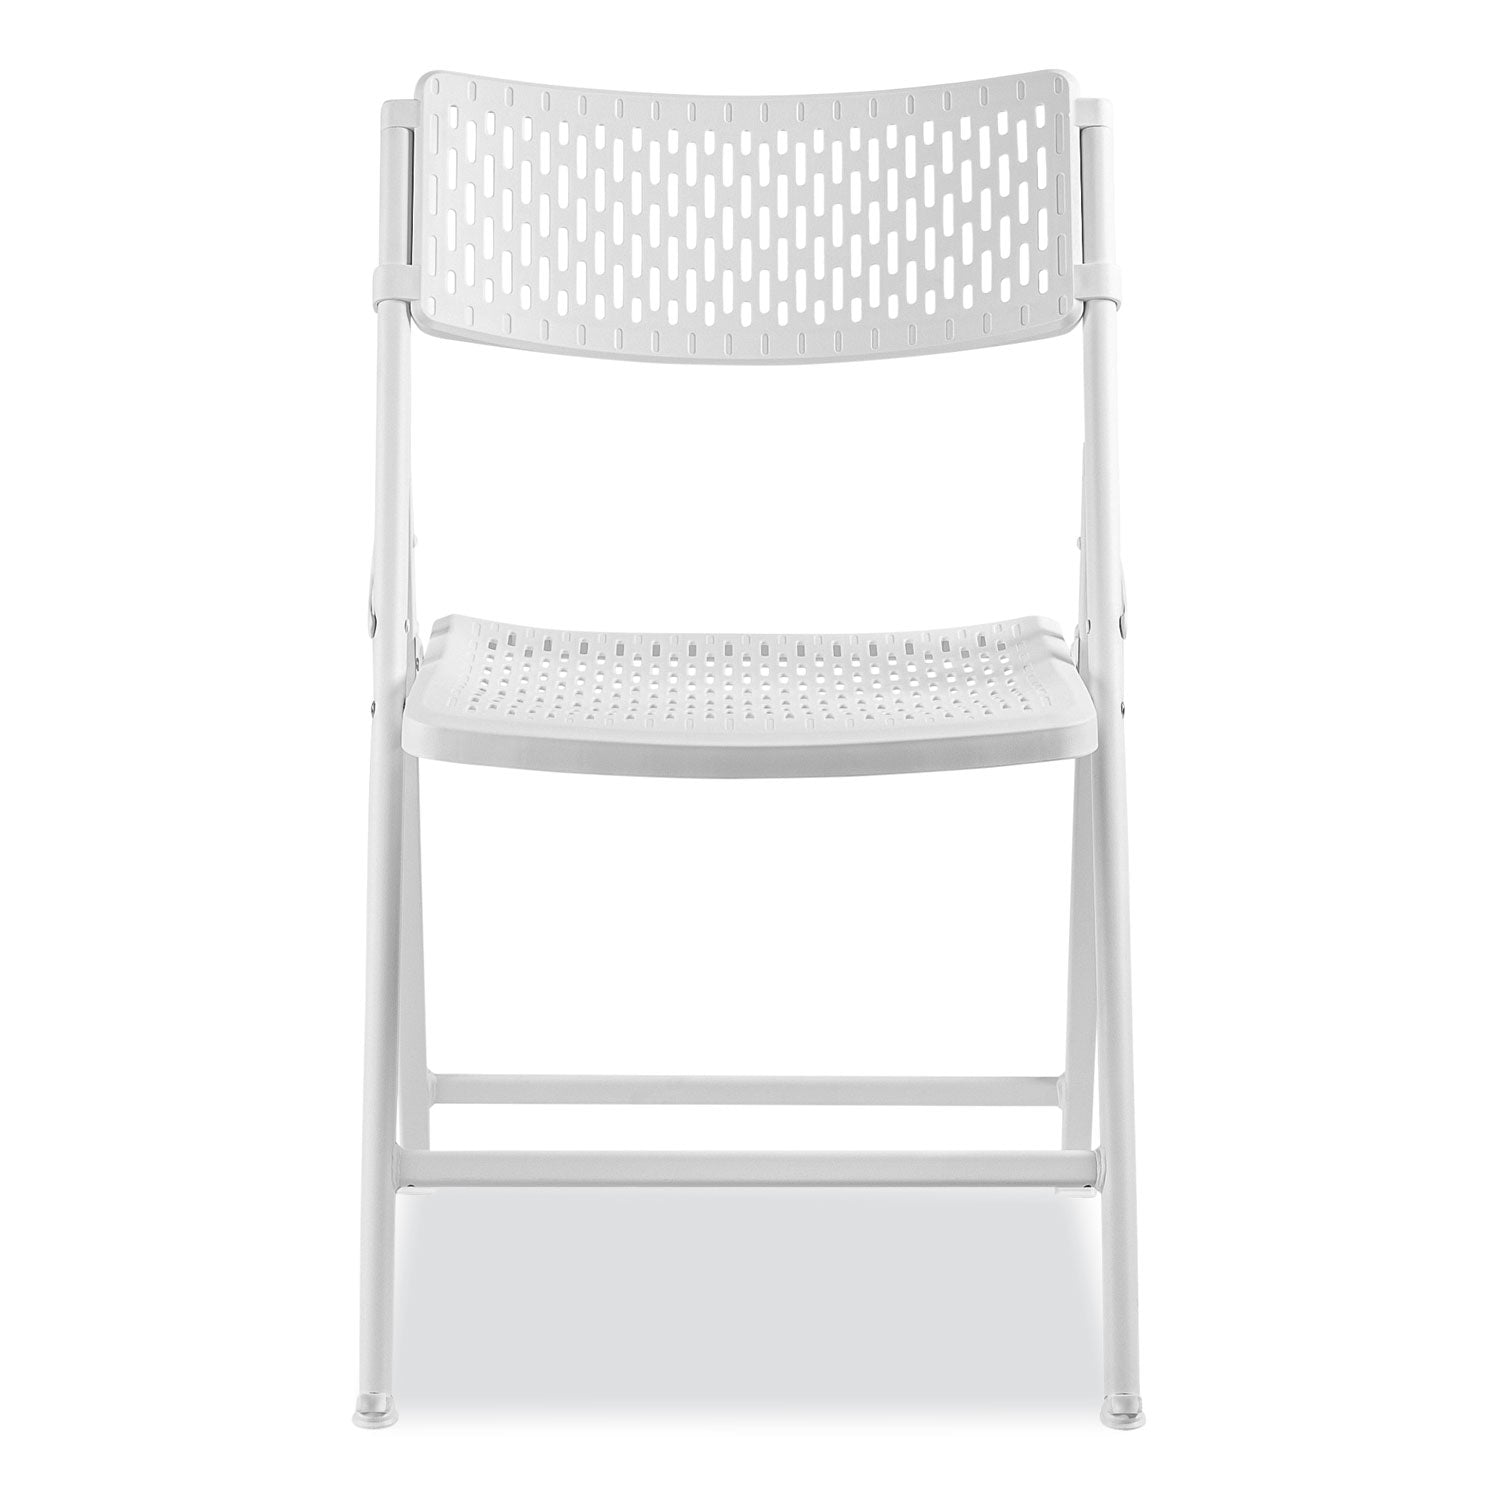 airflex-series-premium-poly-folding-chair-supports-1000-lb-1725-seat-ht-white-seat-back-base-4-ctships-in-1-3-bus-days_nps1421 - 3